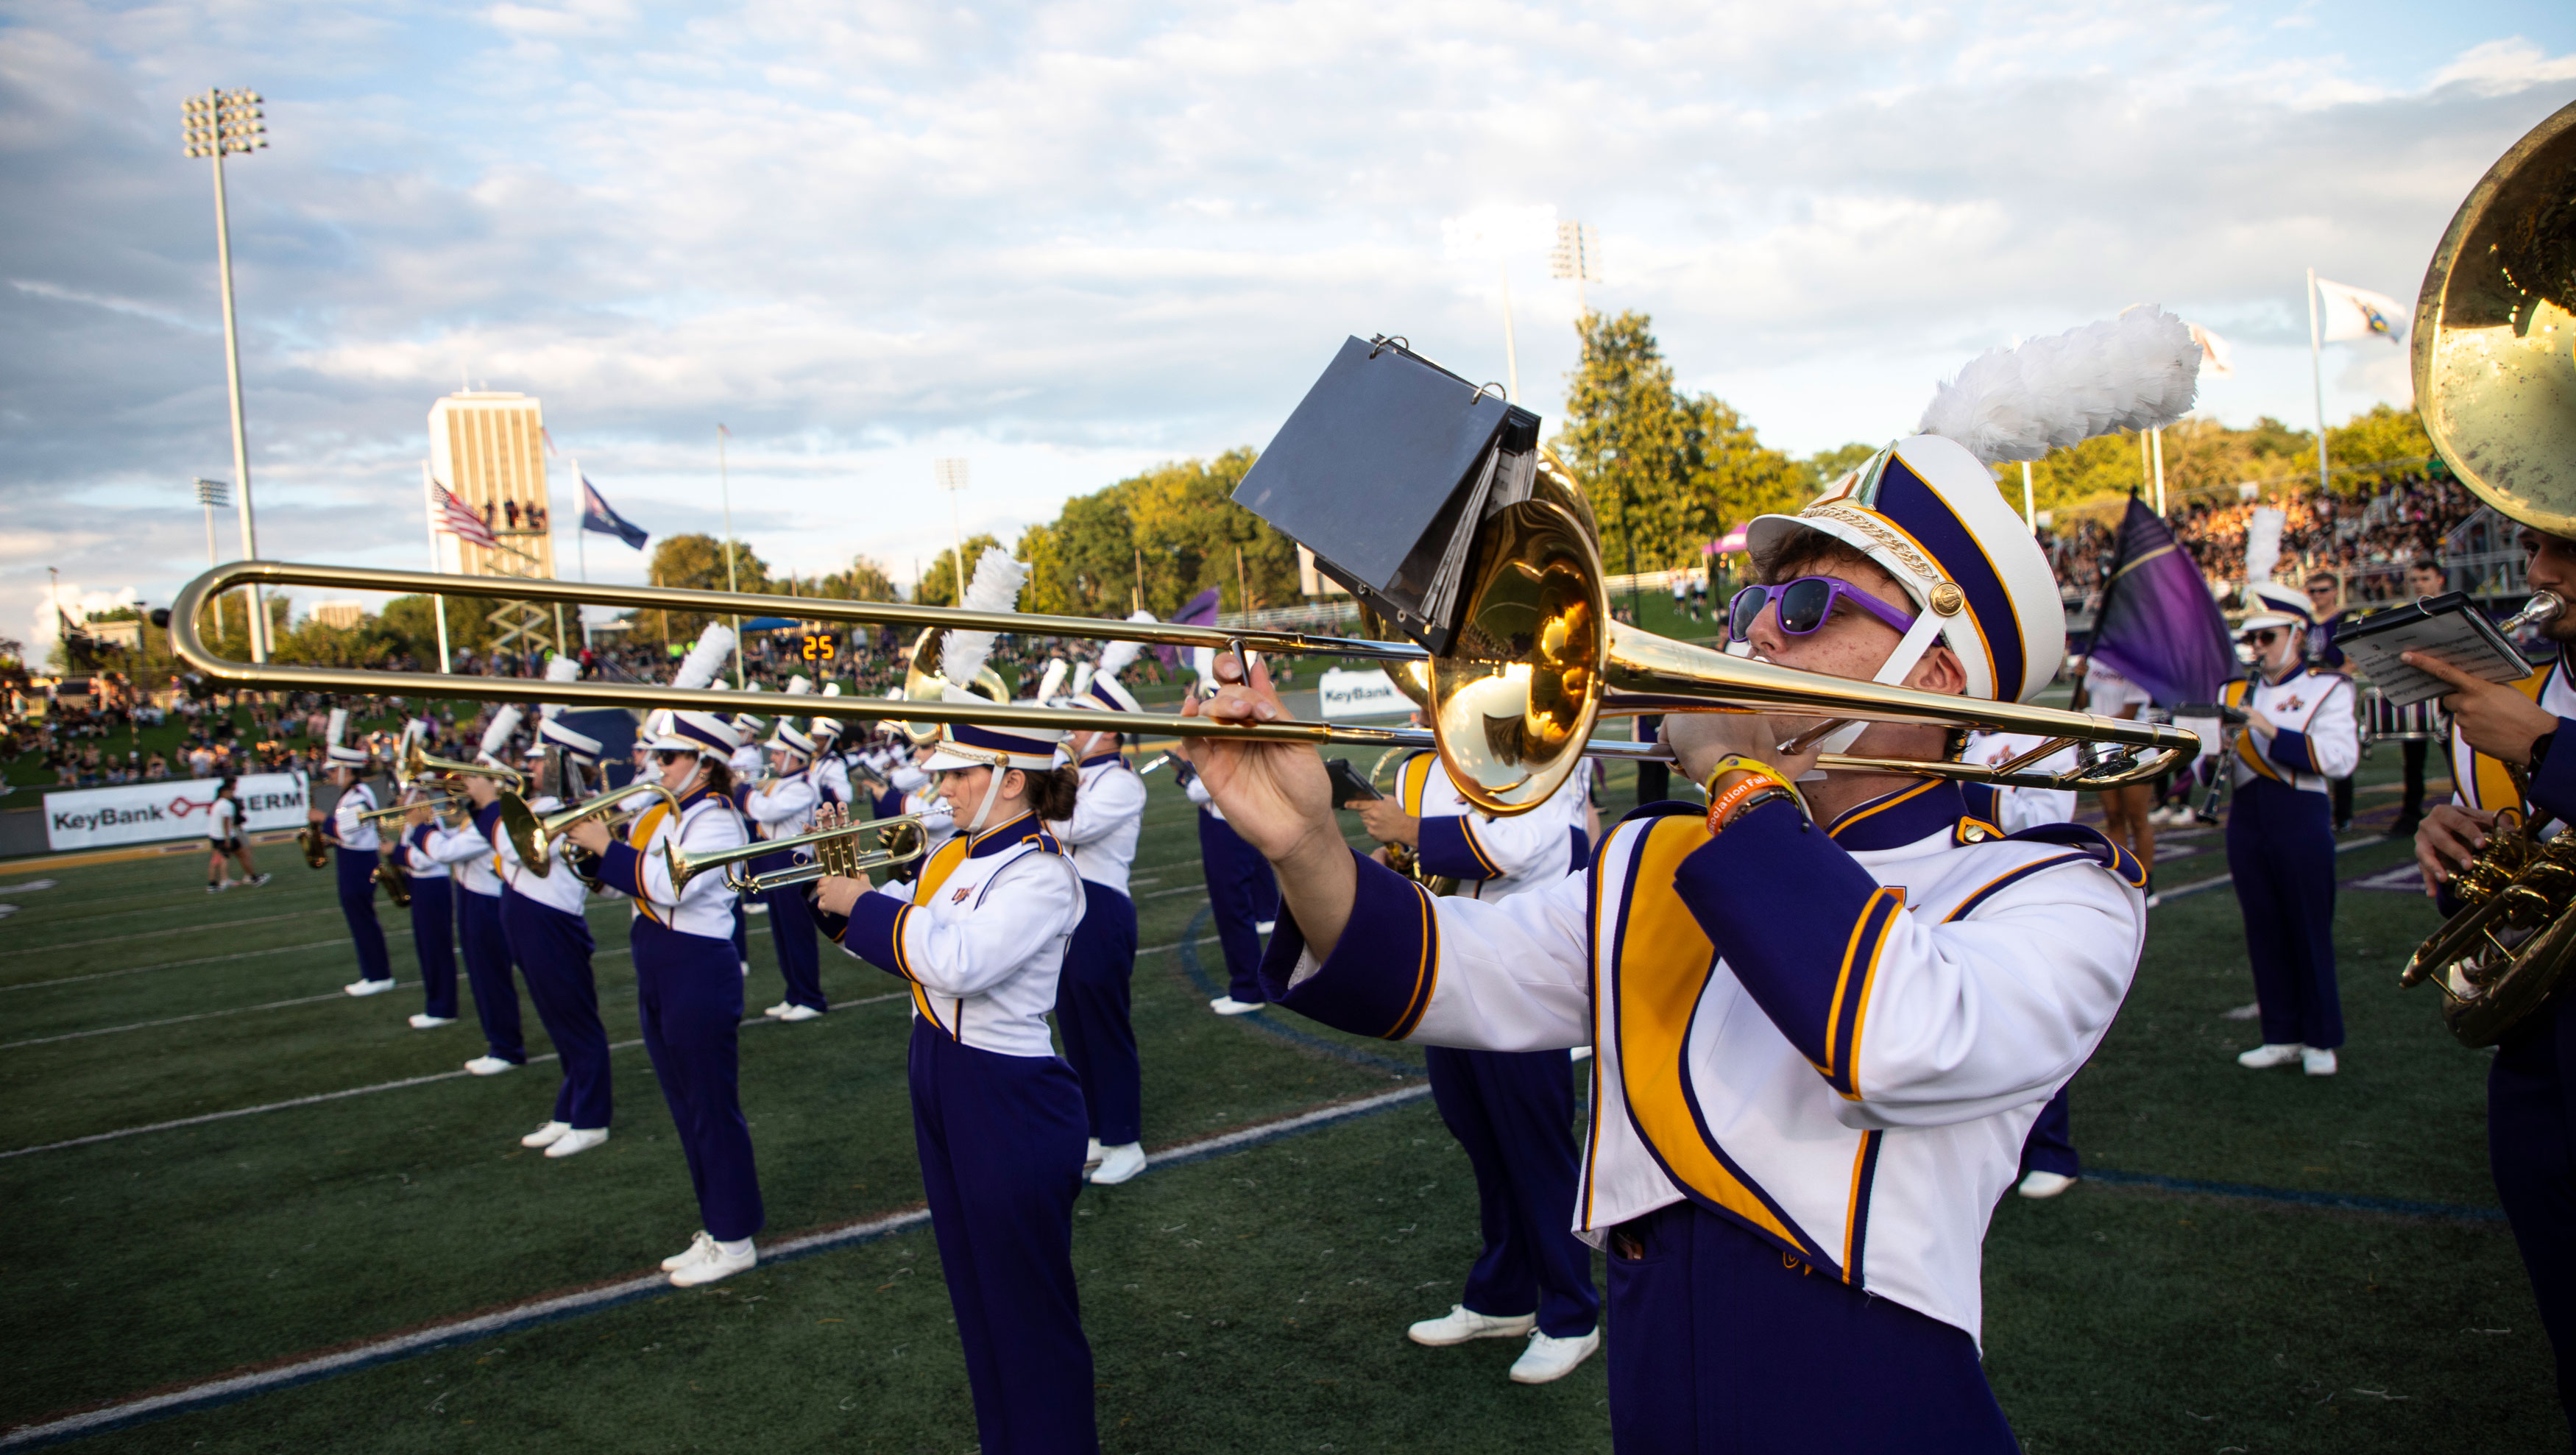 The Marching Great Danes perform in uniform on the Casey Stadium field.